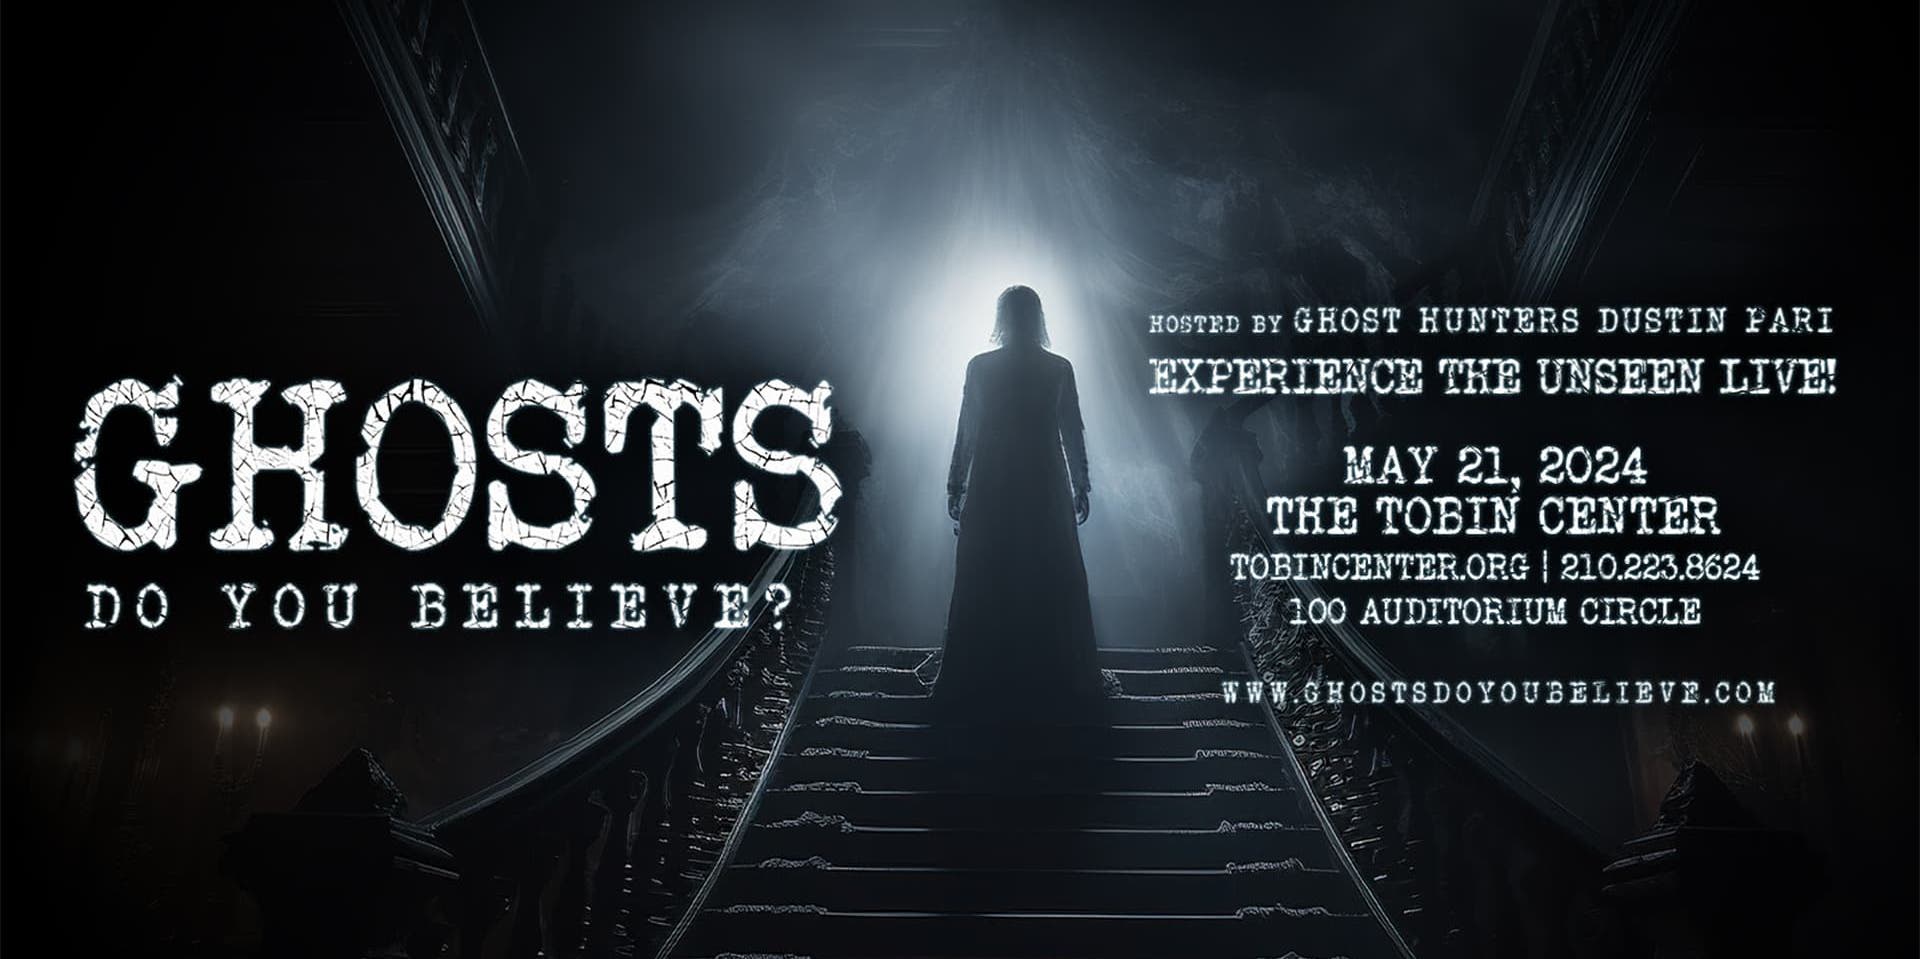 Ghosts: Do You Believe? promotional image